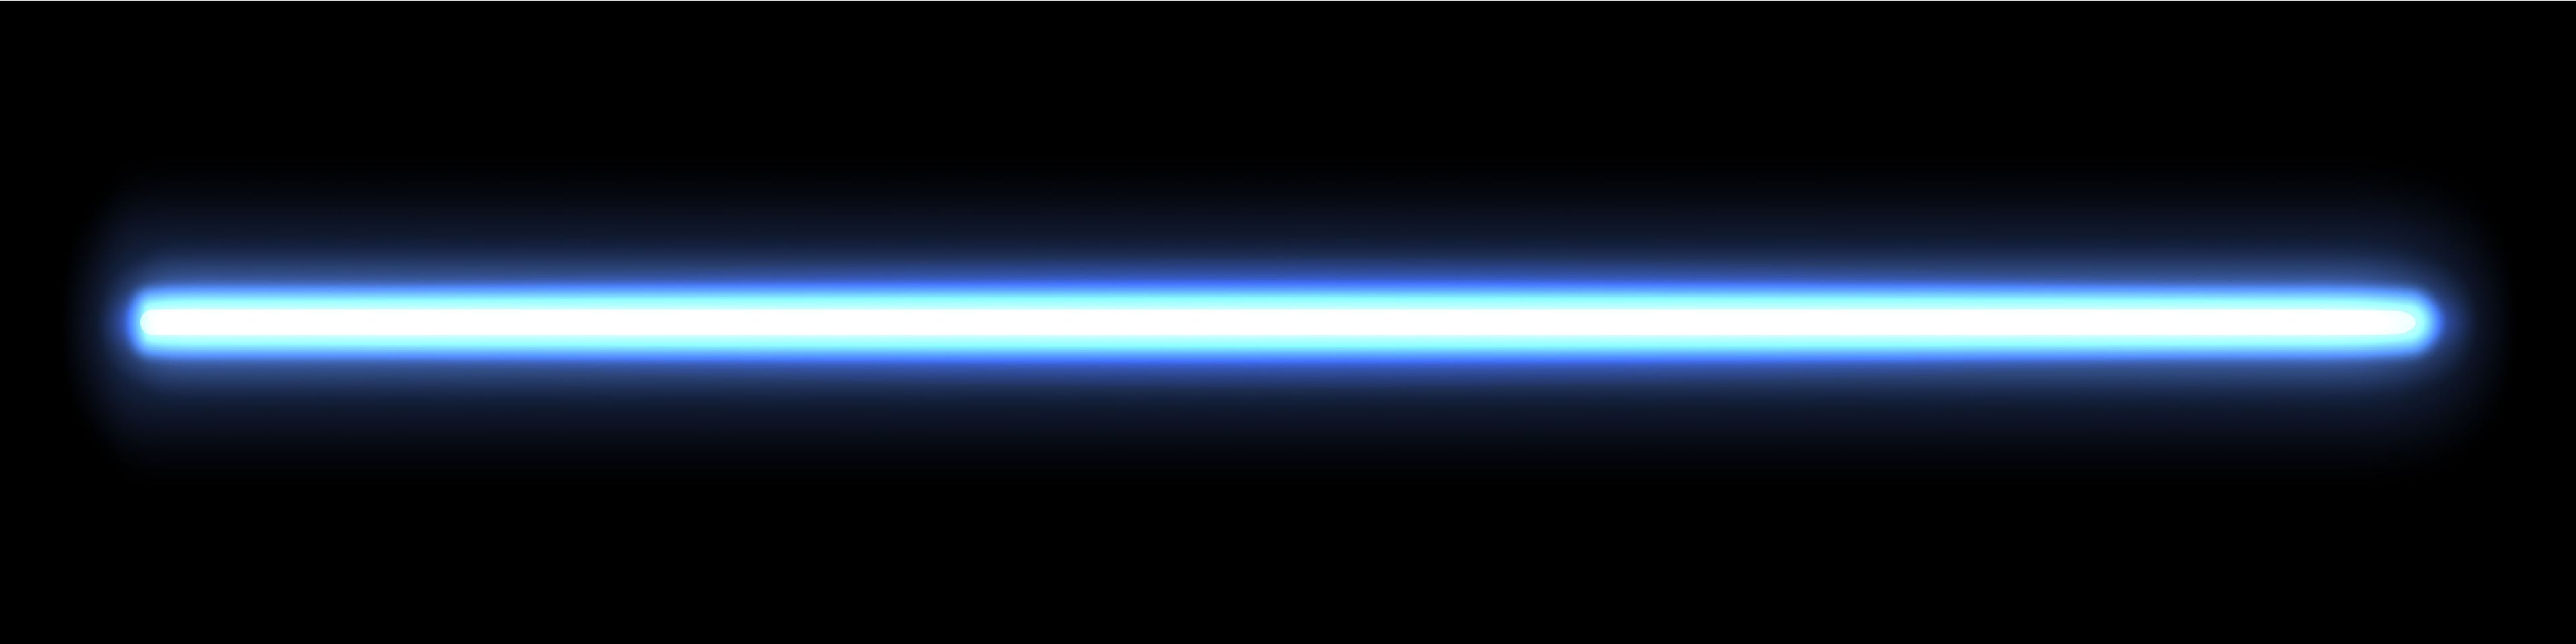 Neon glow stick. Blue laser ray. Fluorescent light ray. | Image Credit: © o_a - stock.adobe.com